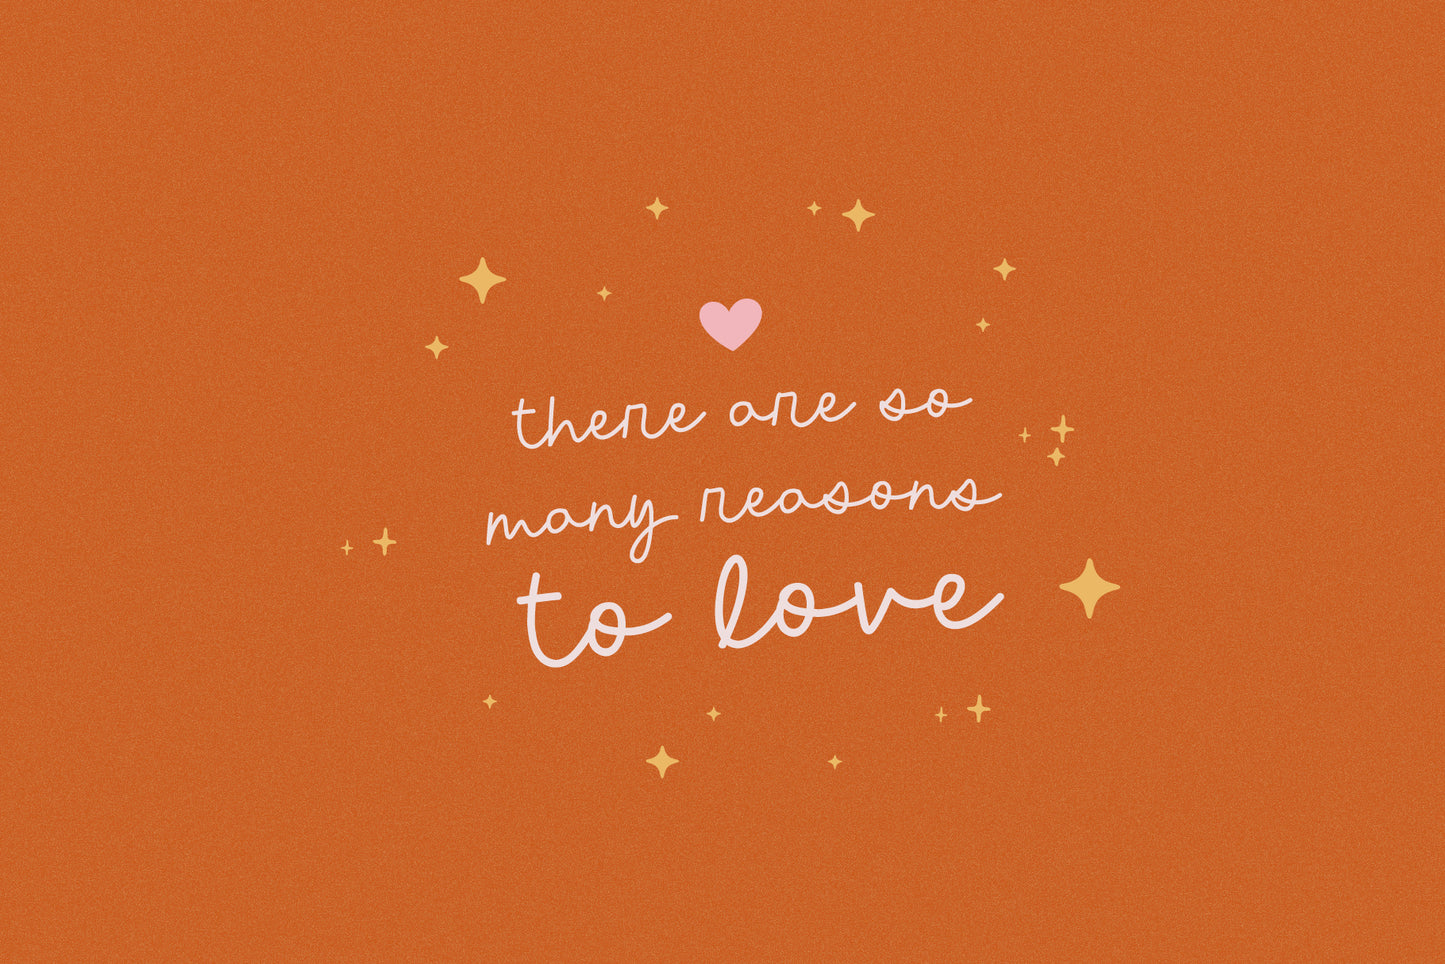 A Little of Love Quirky Font Duo